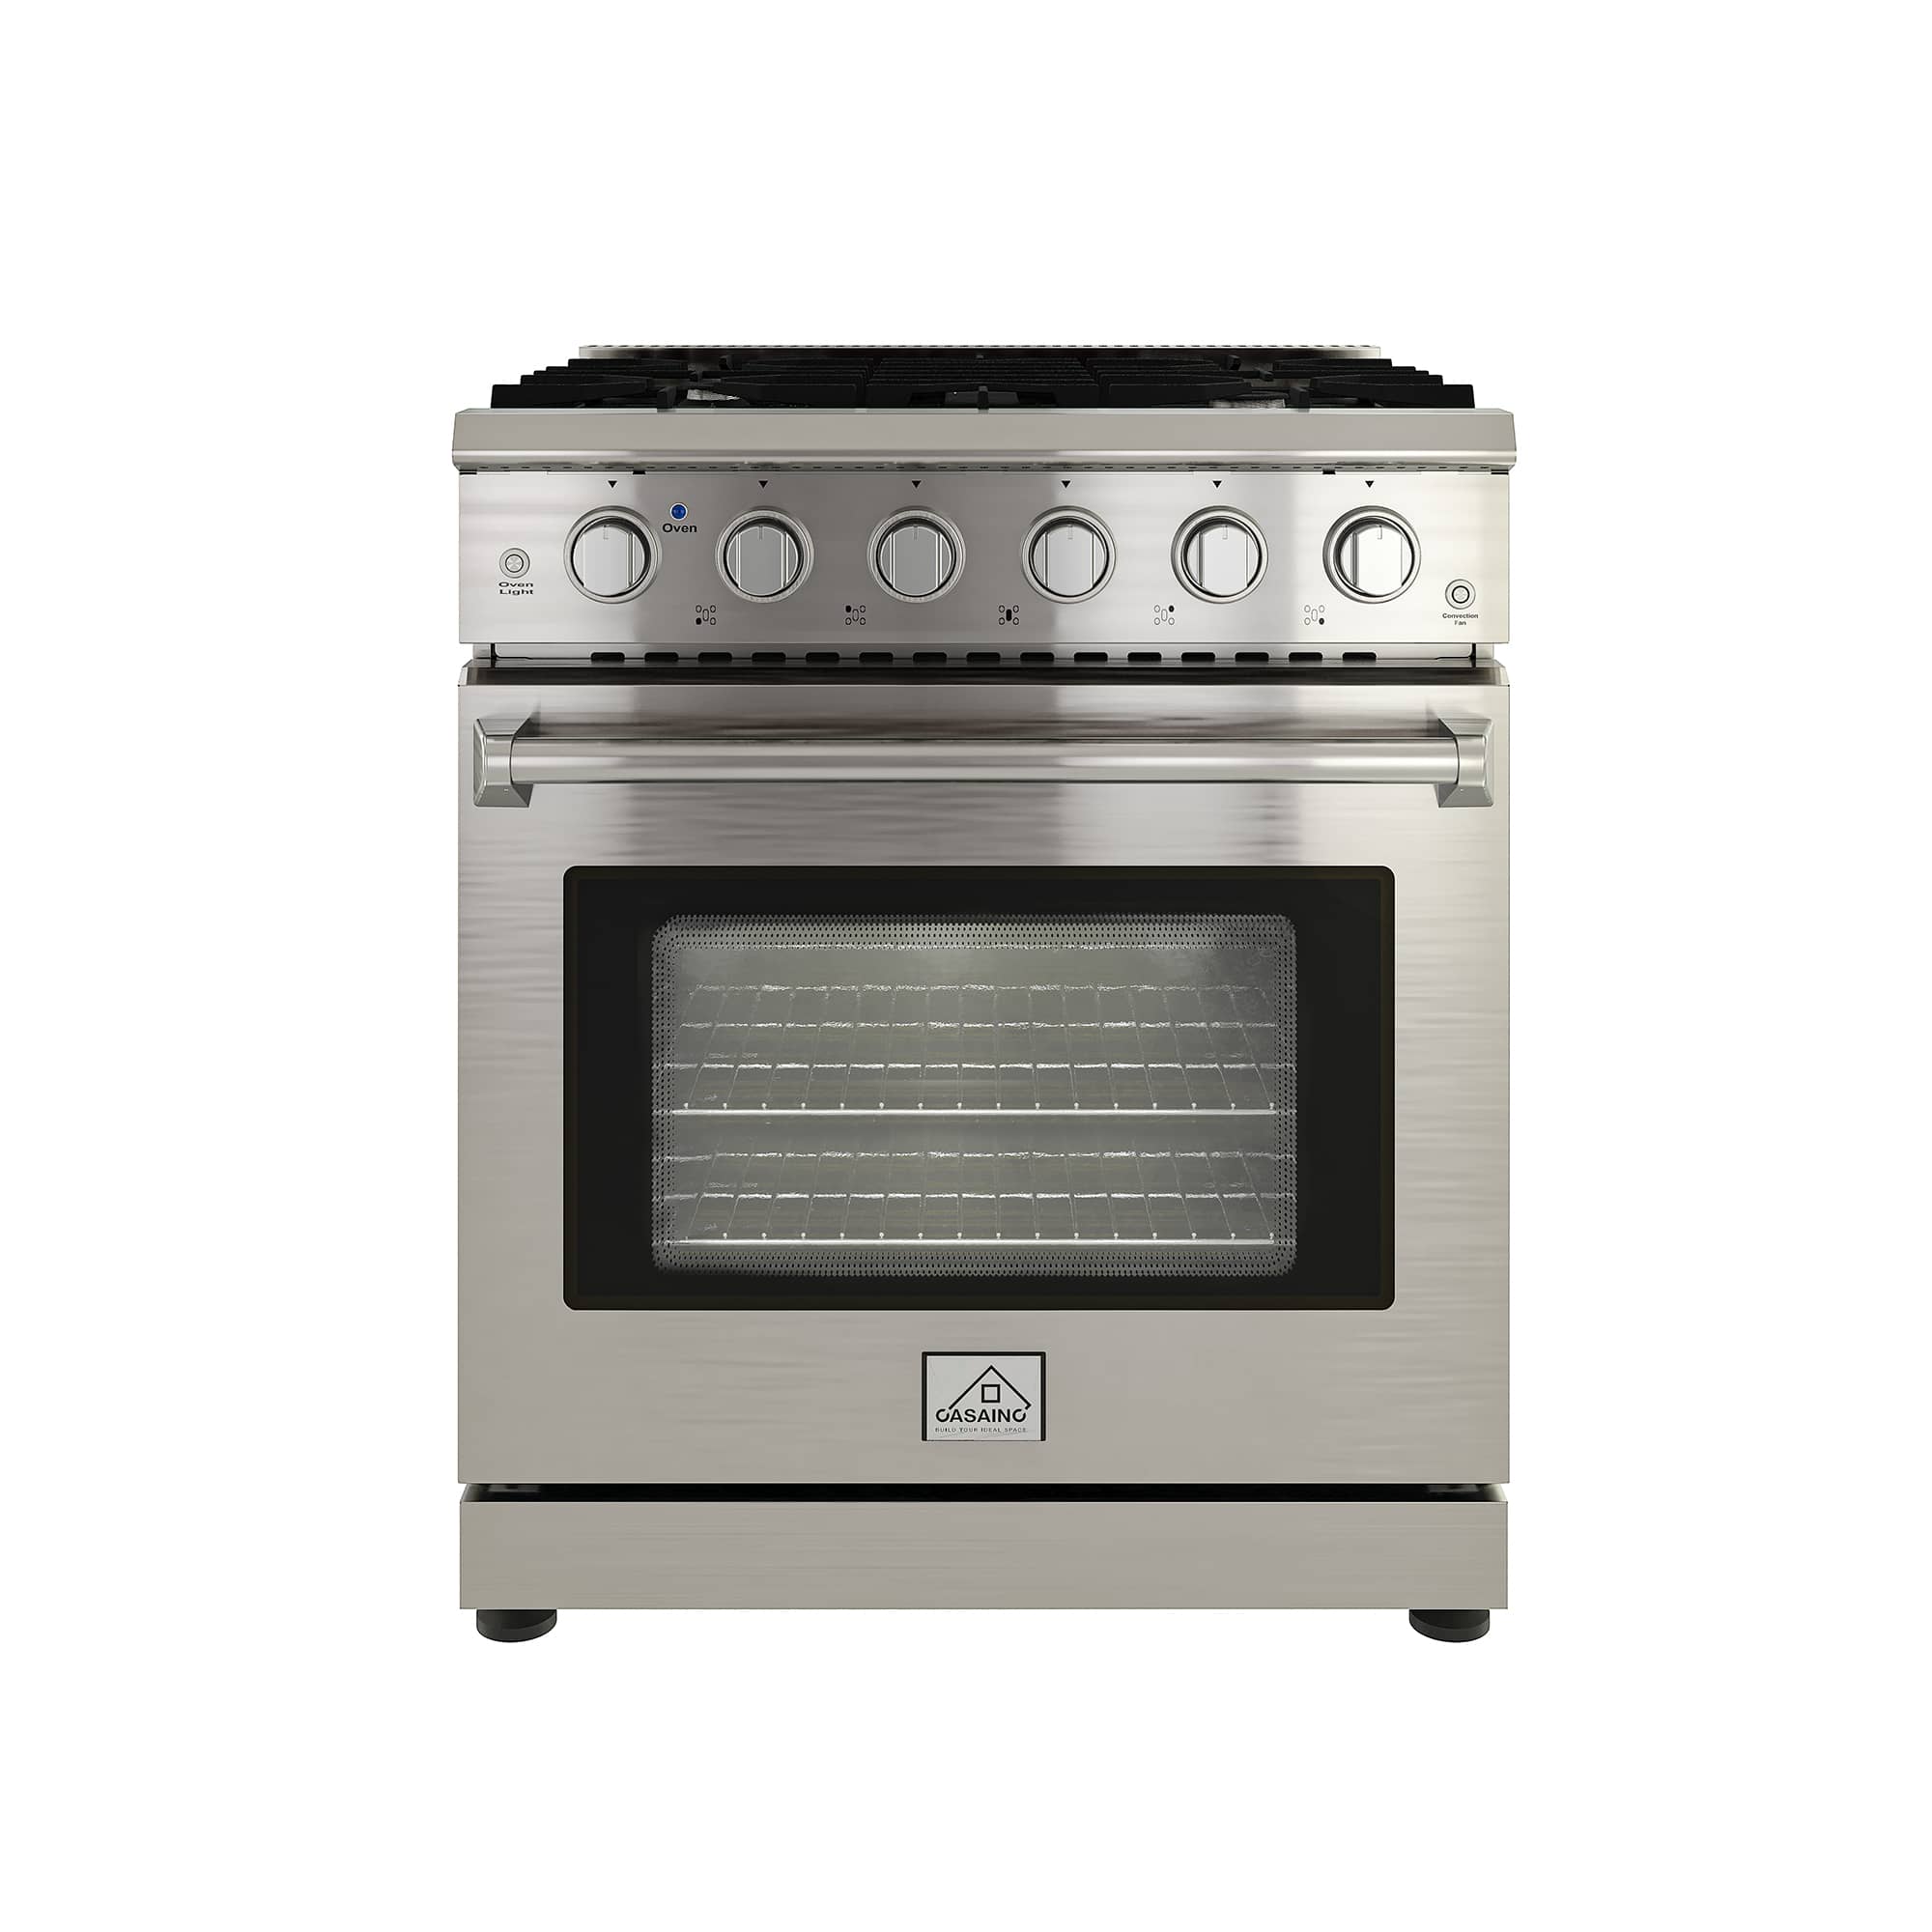 CASAINC 30 in. 4.55 cu. ft. Freestanding Single Oven Gas Range in. Stainless Steel with Convection Fan and 5 Burner